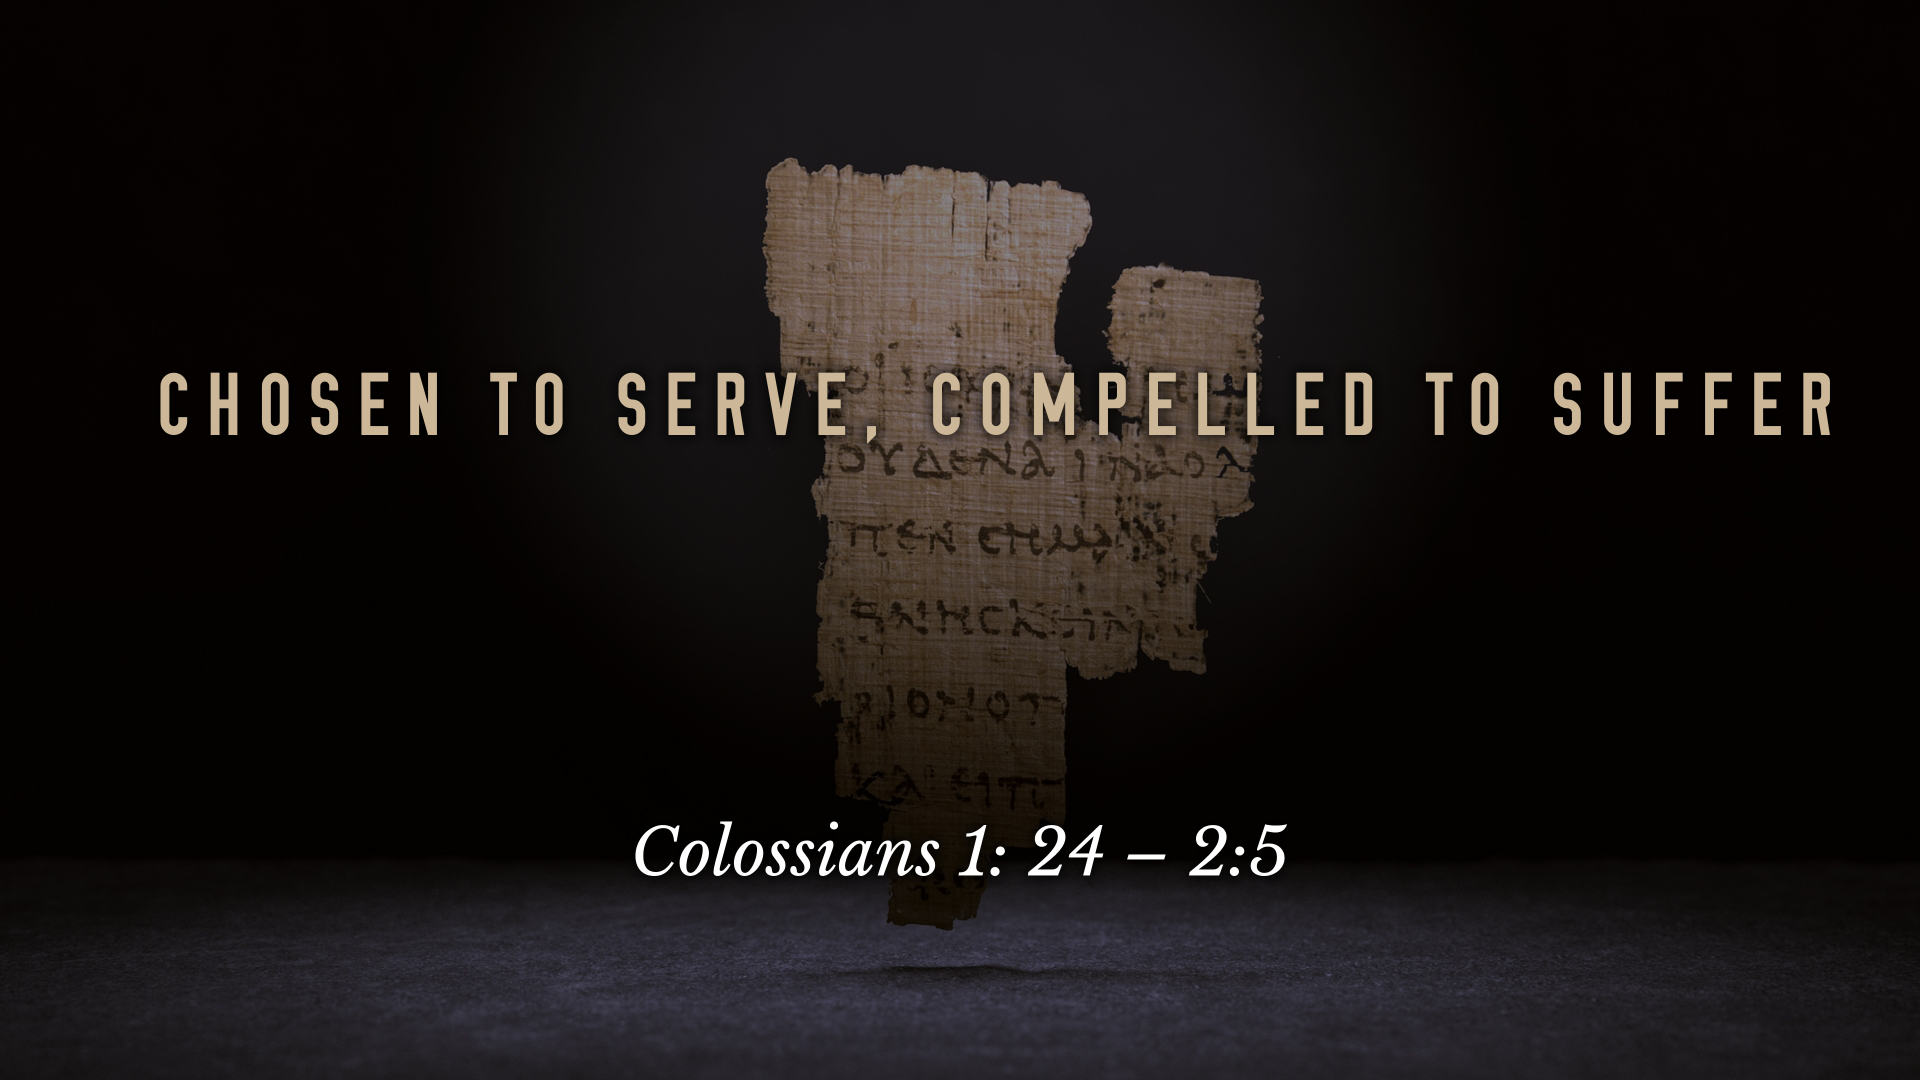 Sep 11, 2022 - Chosen to Serve, Compelled to Suffer (Video) - Colossians 1: 24 – 2:5